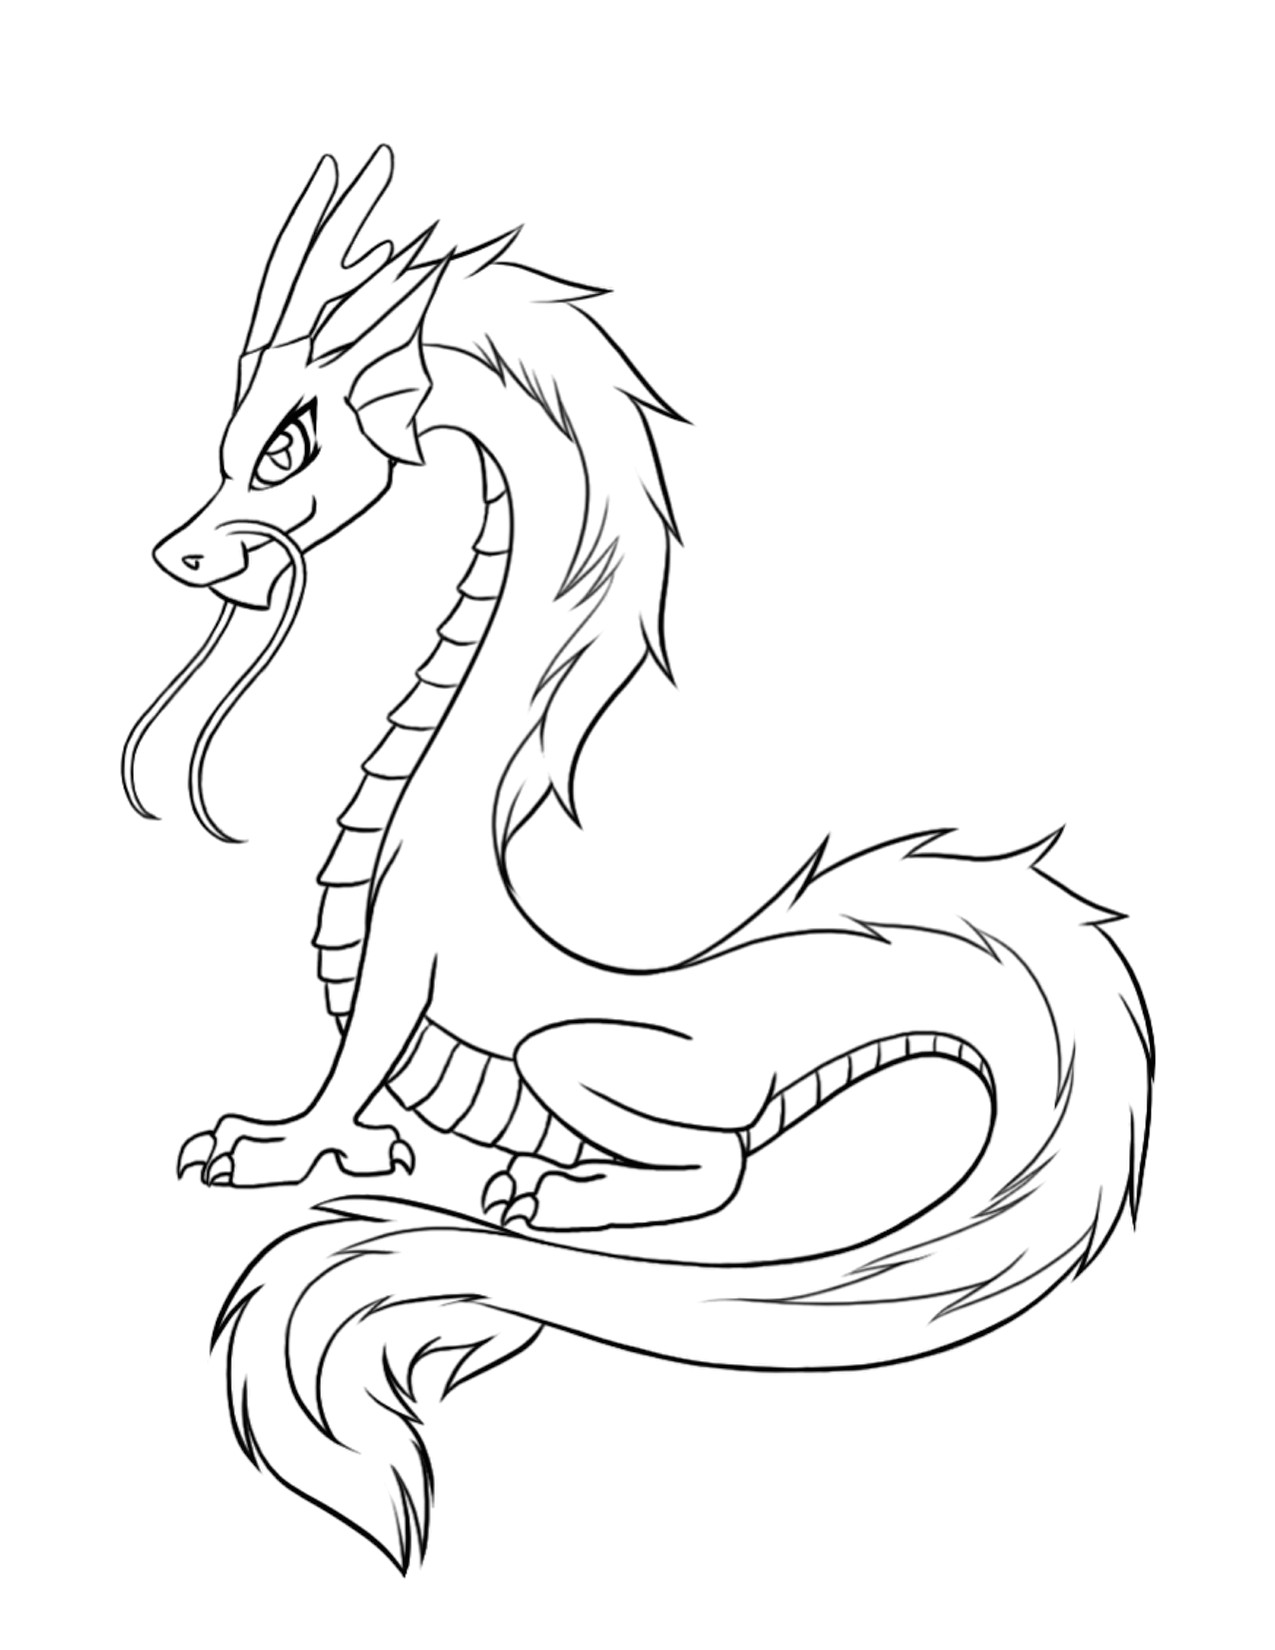 Simple Drawings Of Chinese Dragons Free Printable Dragon Coloring Pages for Kids Dragon Sketch